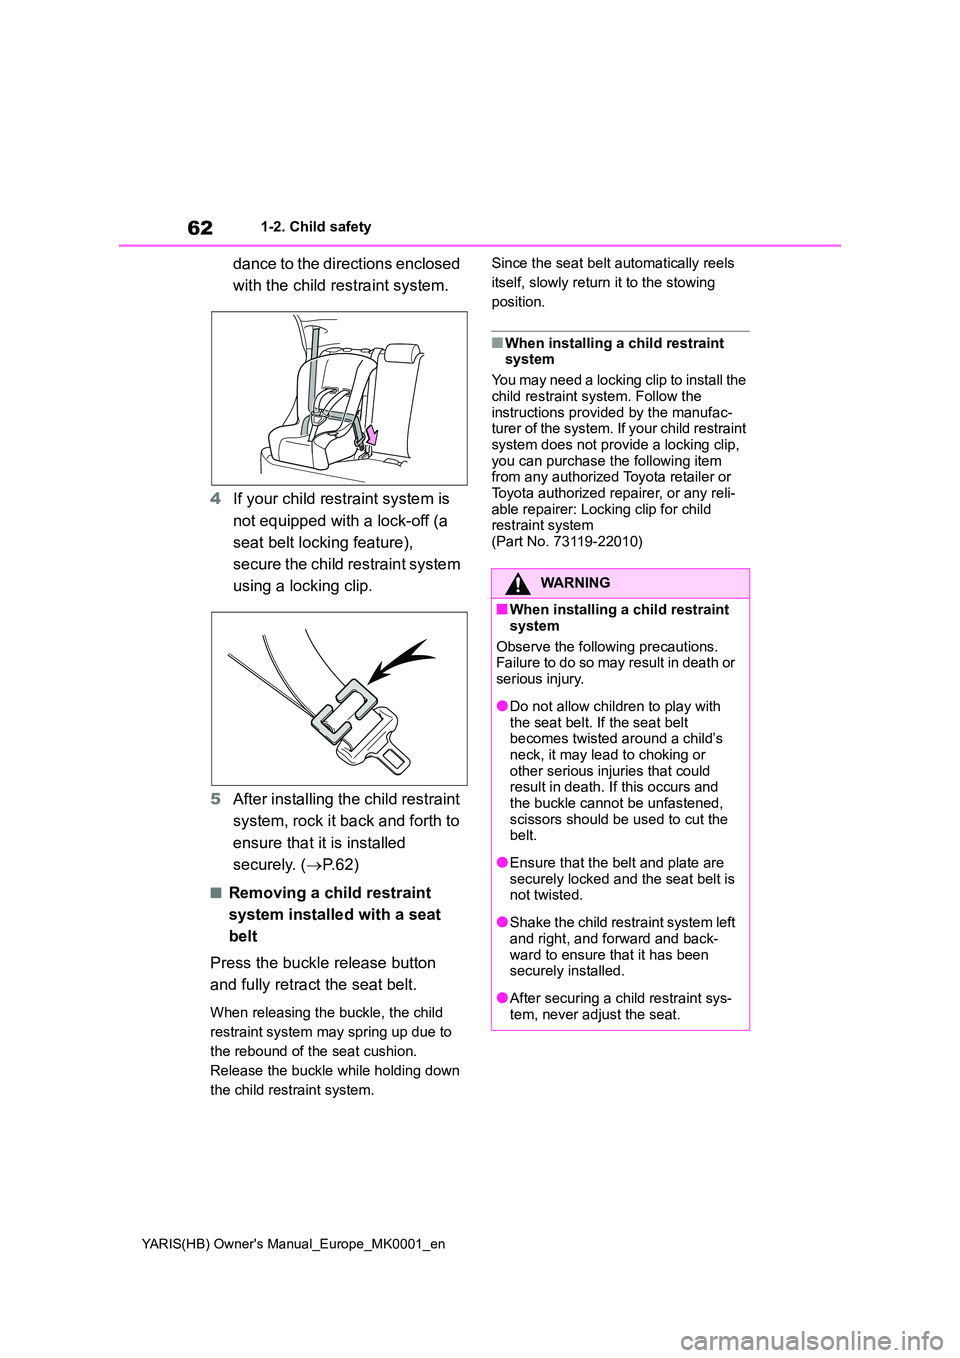 TOYOTA YARIS 2021 Owners Manual 62
YARIS(HB) Owners Manual_Europe_MK0001_en
1-2. Child safety
dance to the directions enclosed  
with the child restraint system. 
4 If your child restraint system is  
not equipped with a lock-off (